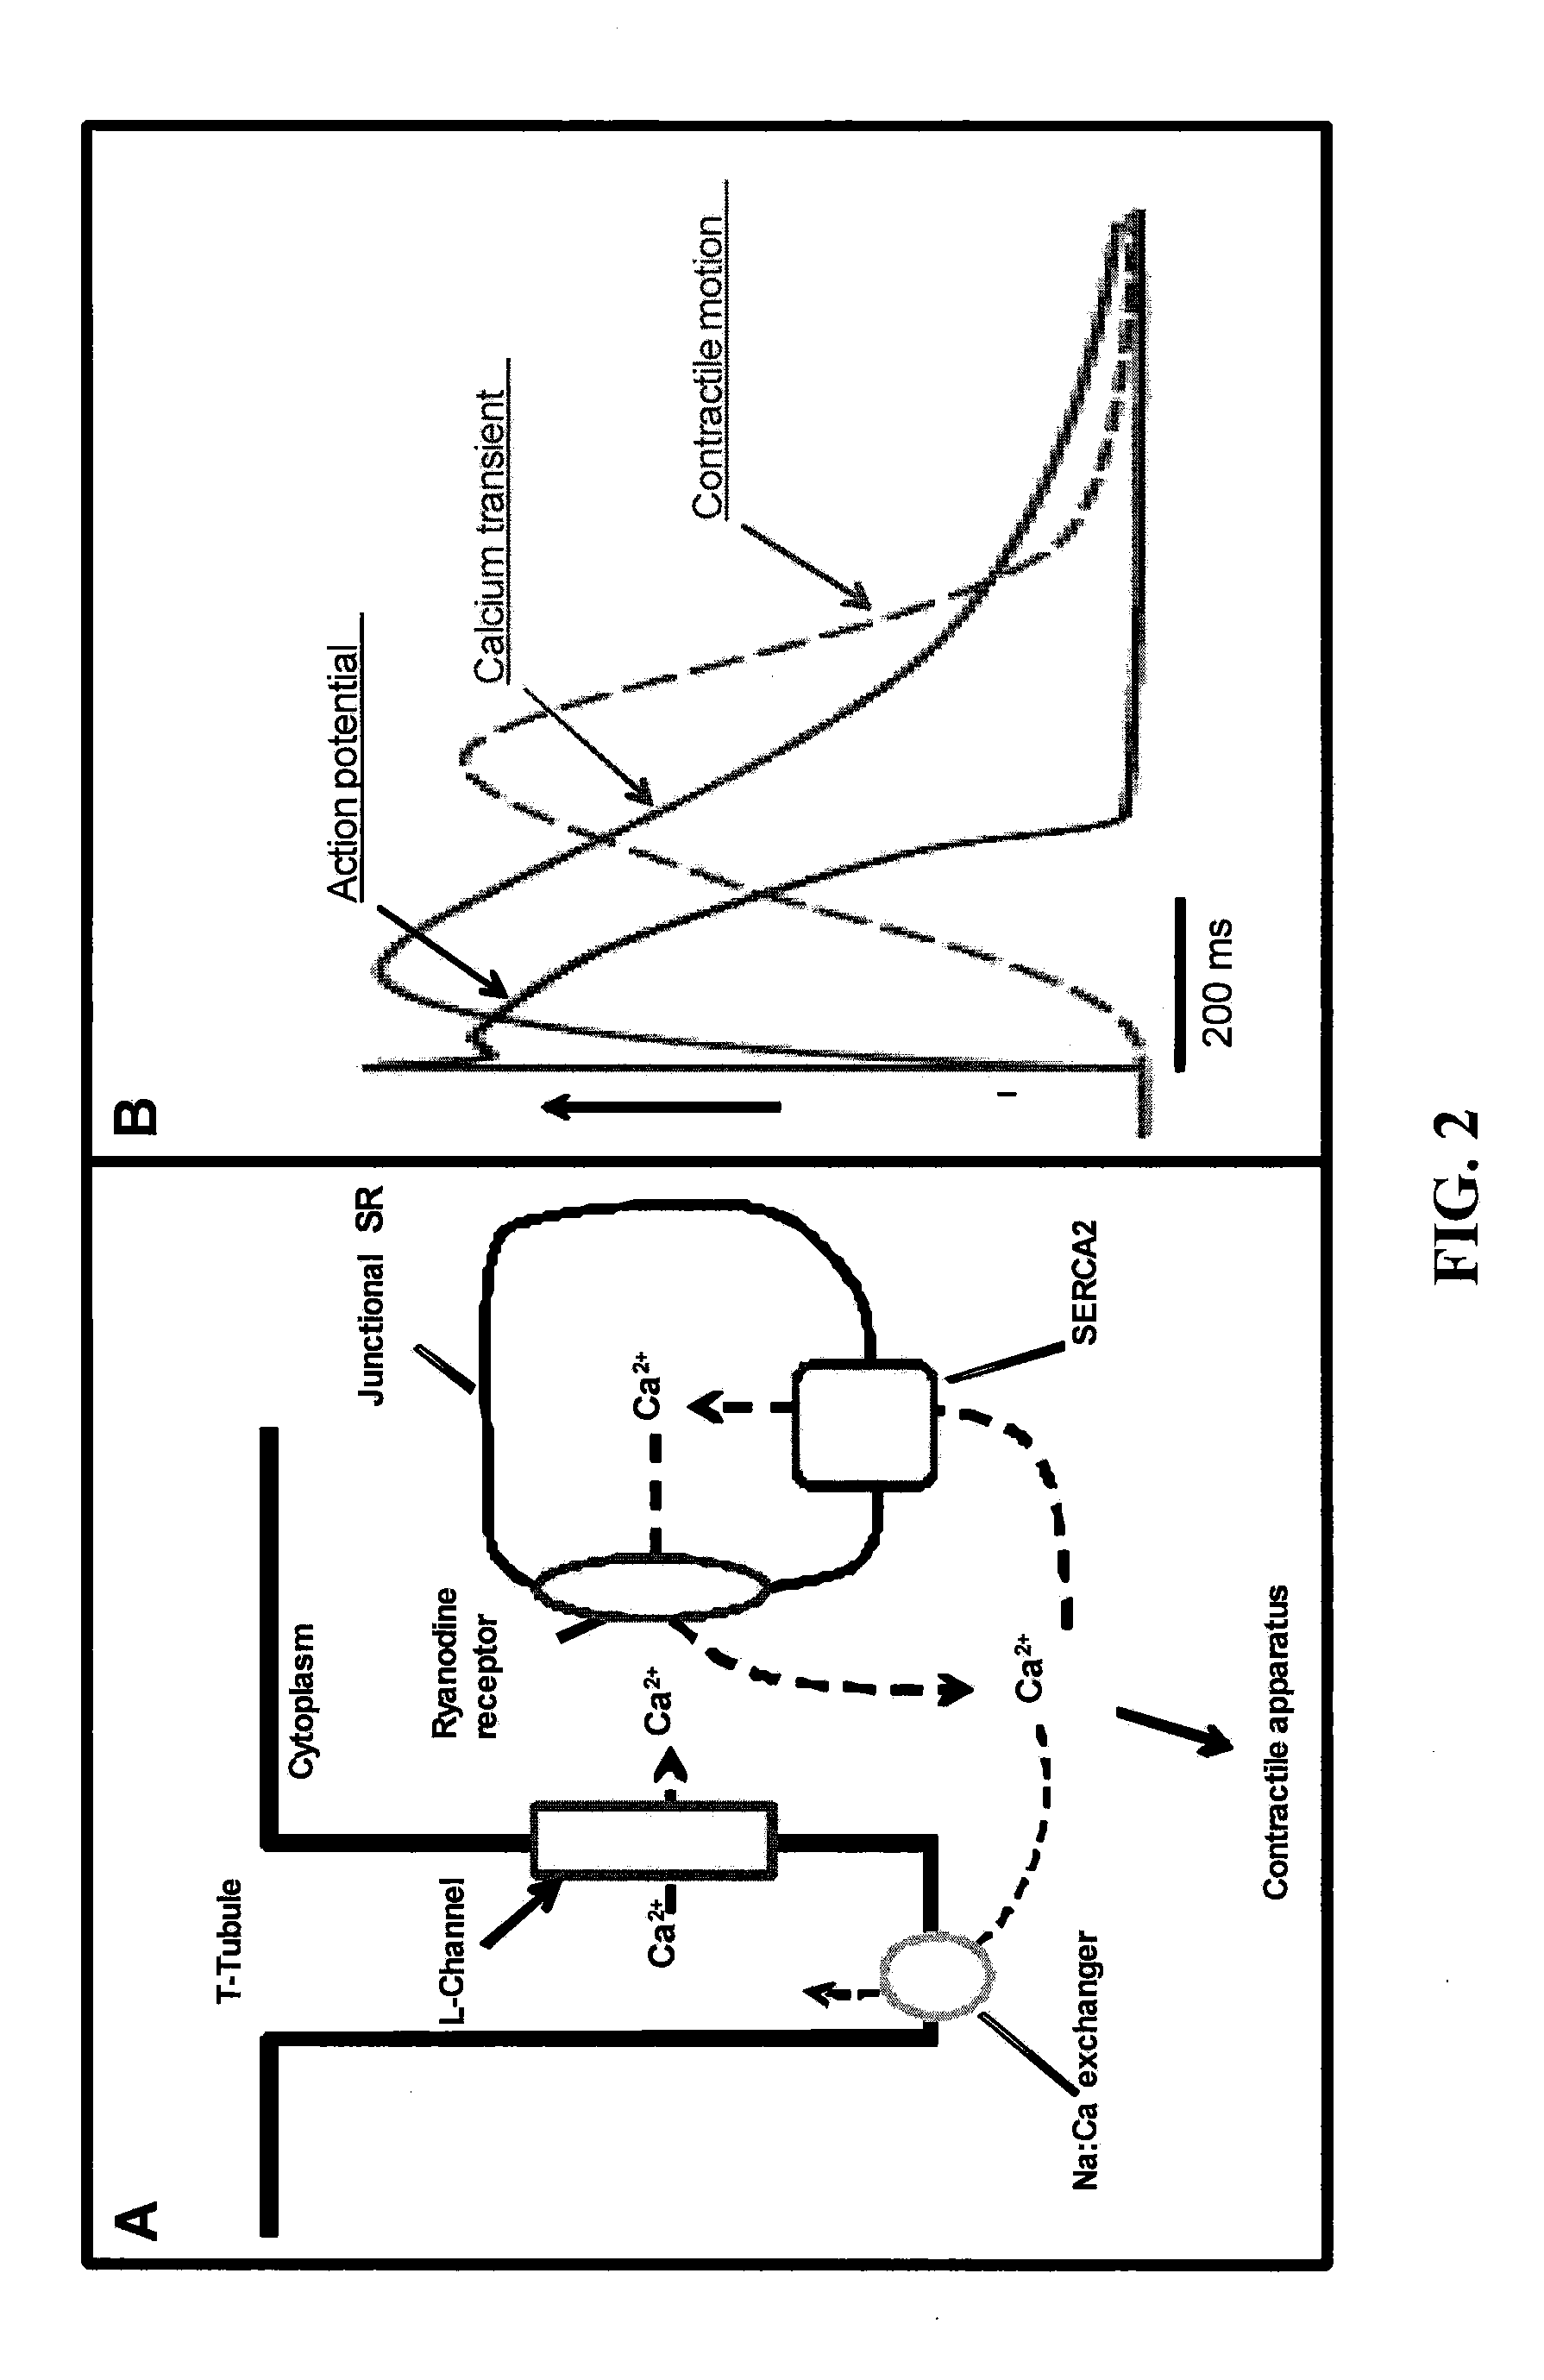 Method, system and composition for optically inducing cardiomyocyte contraction